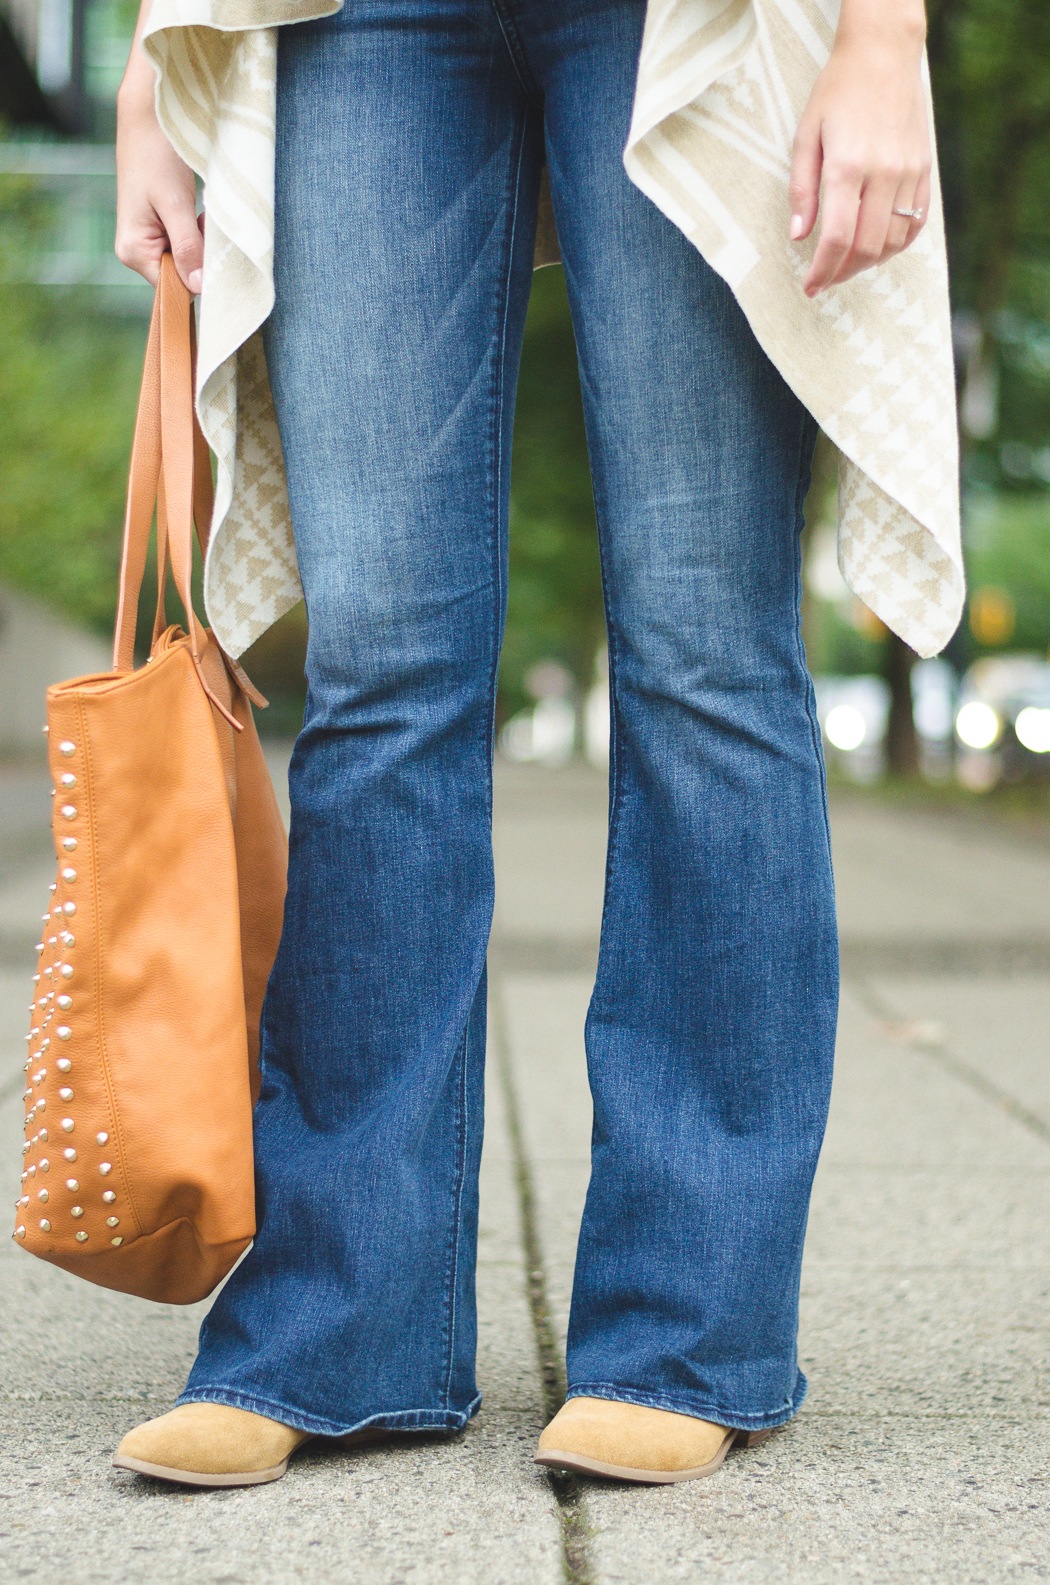 Flared Jeans Outfit Idea - Vancouver Style Blog | The Urban Umbrella